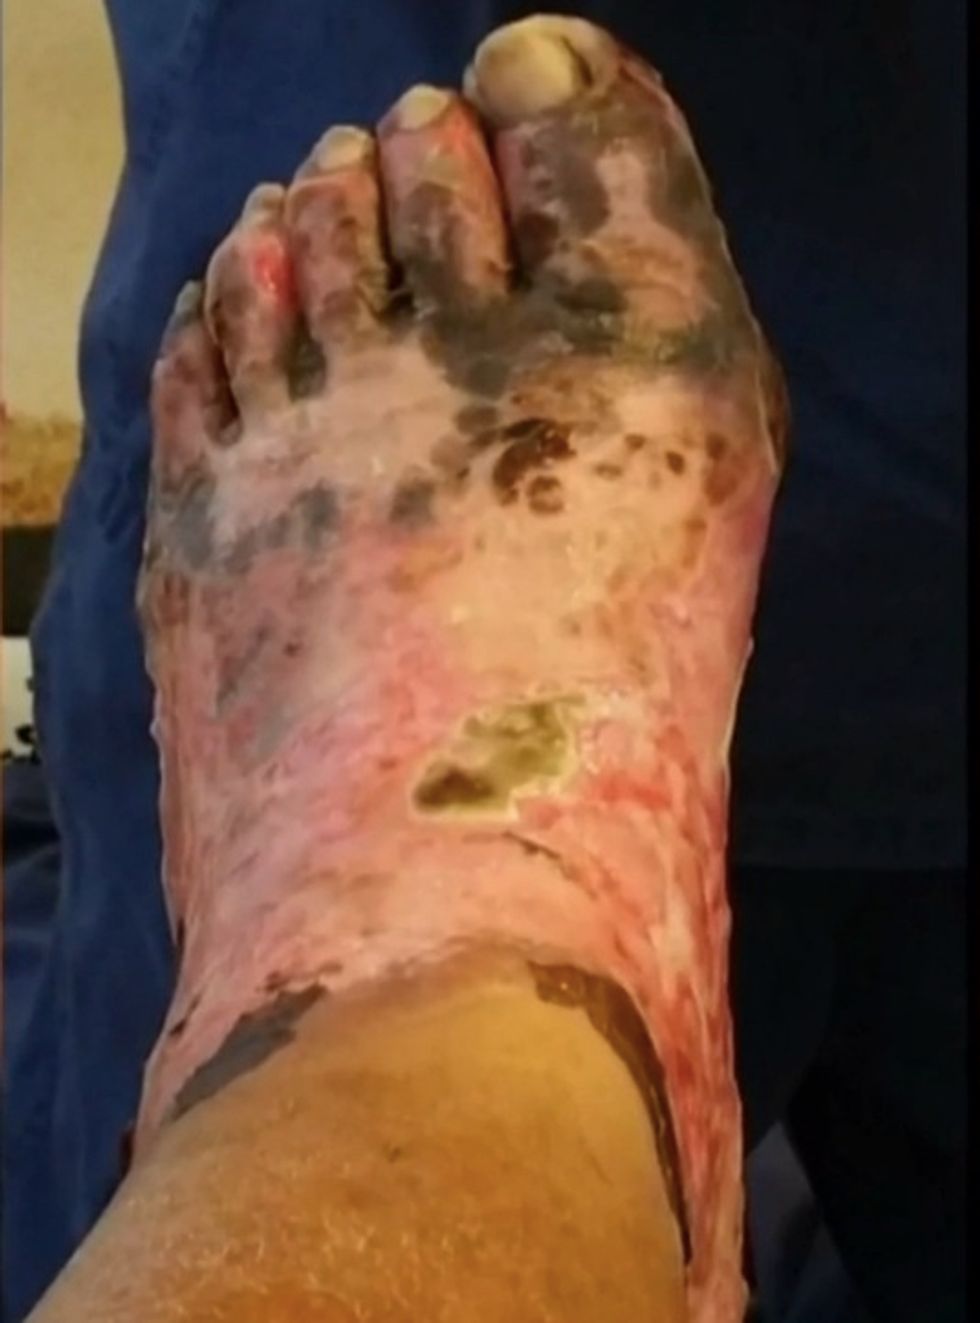 His Persistent Wife Convinced Him to Get a Pedicure With Her — Shock Photos of the Aftermath Show Why He’ll Likely Never Return